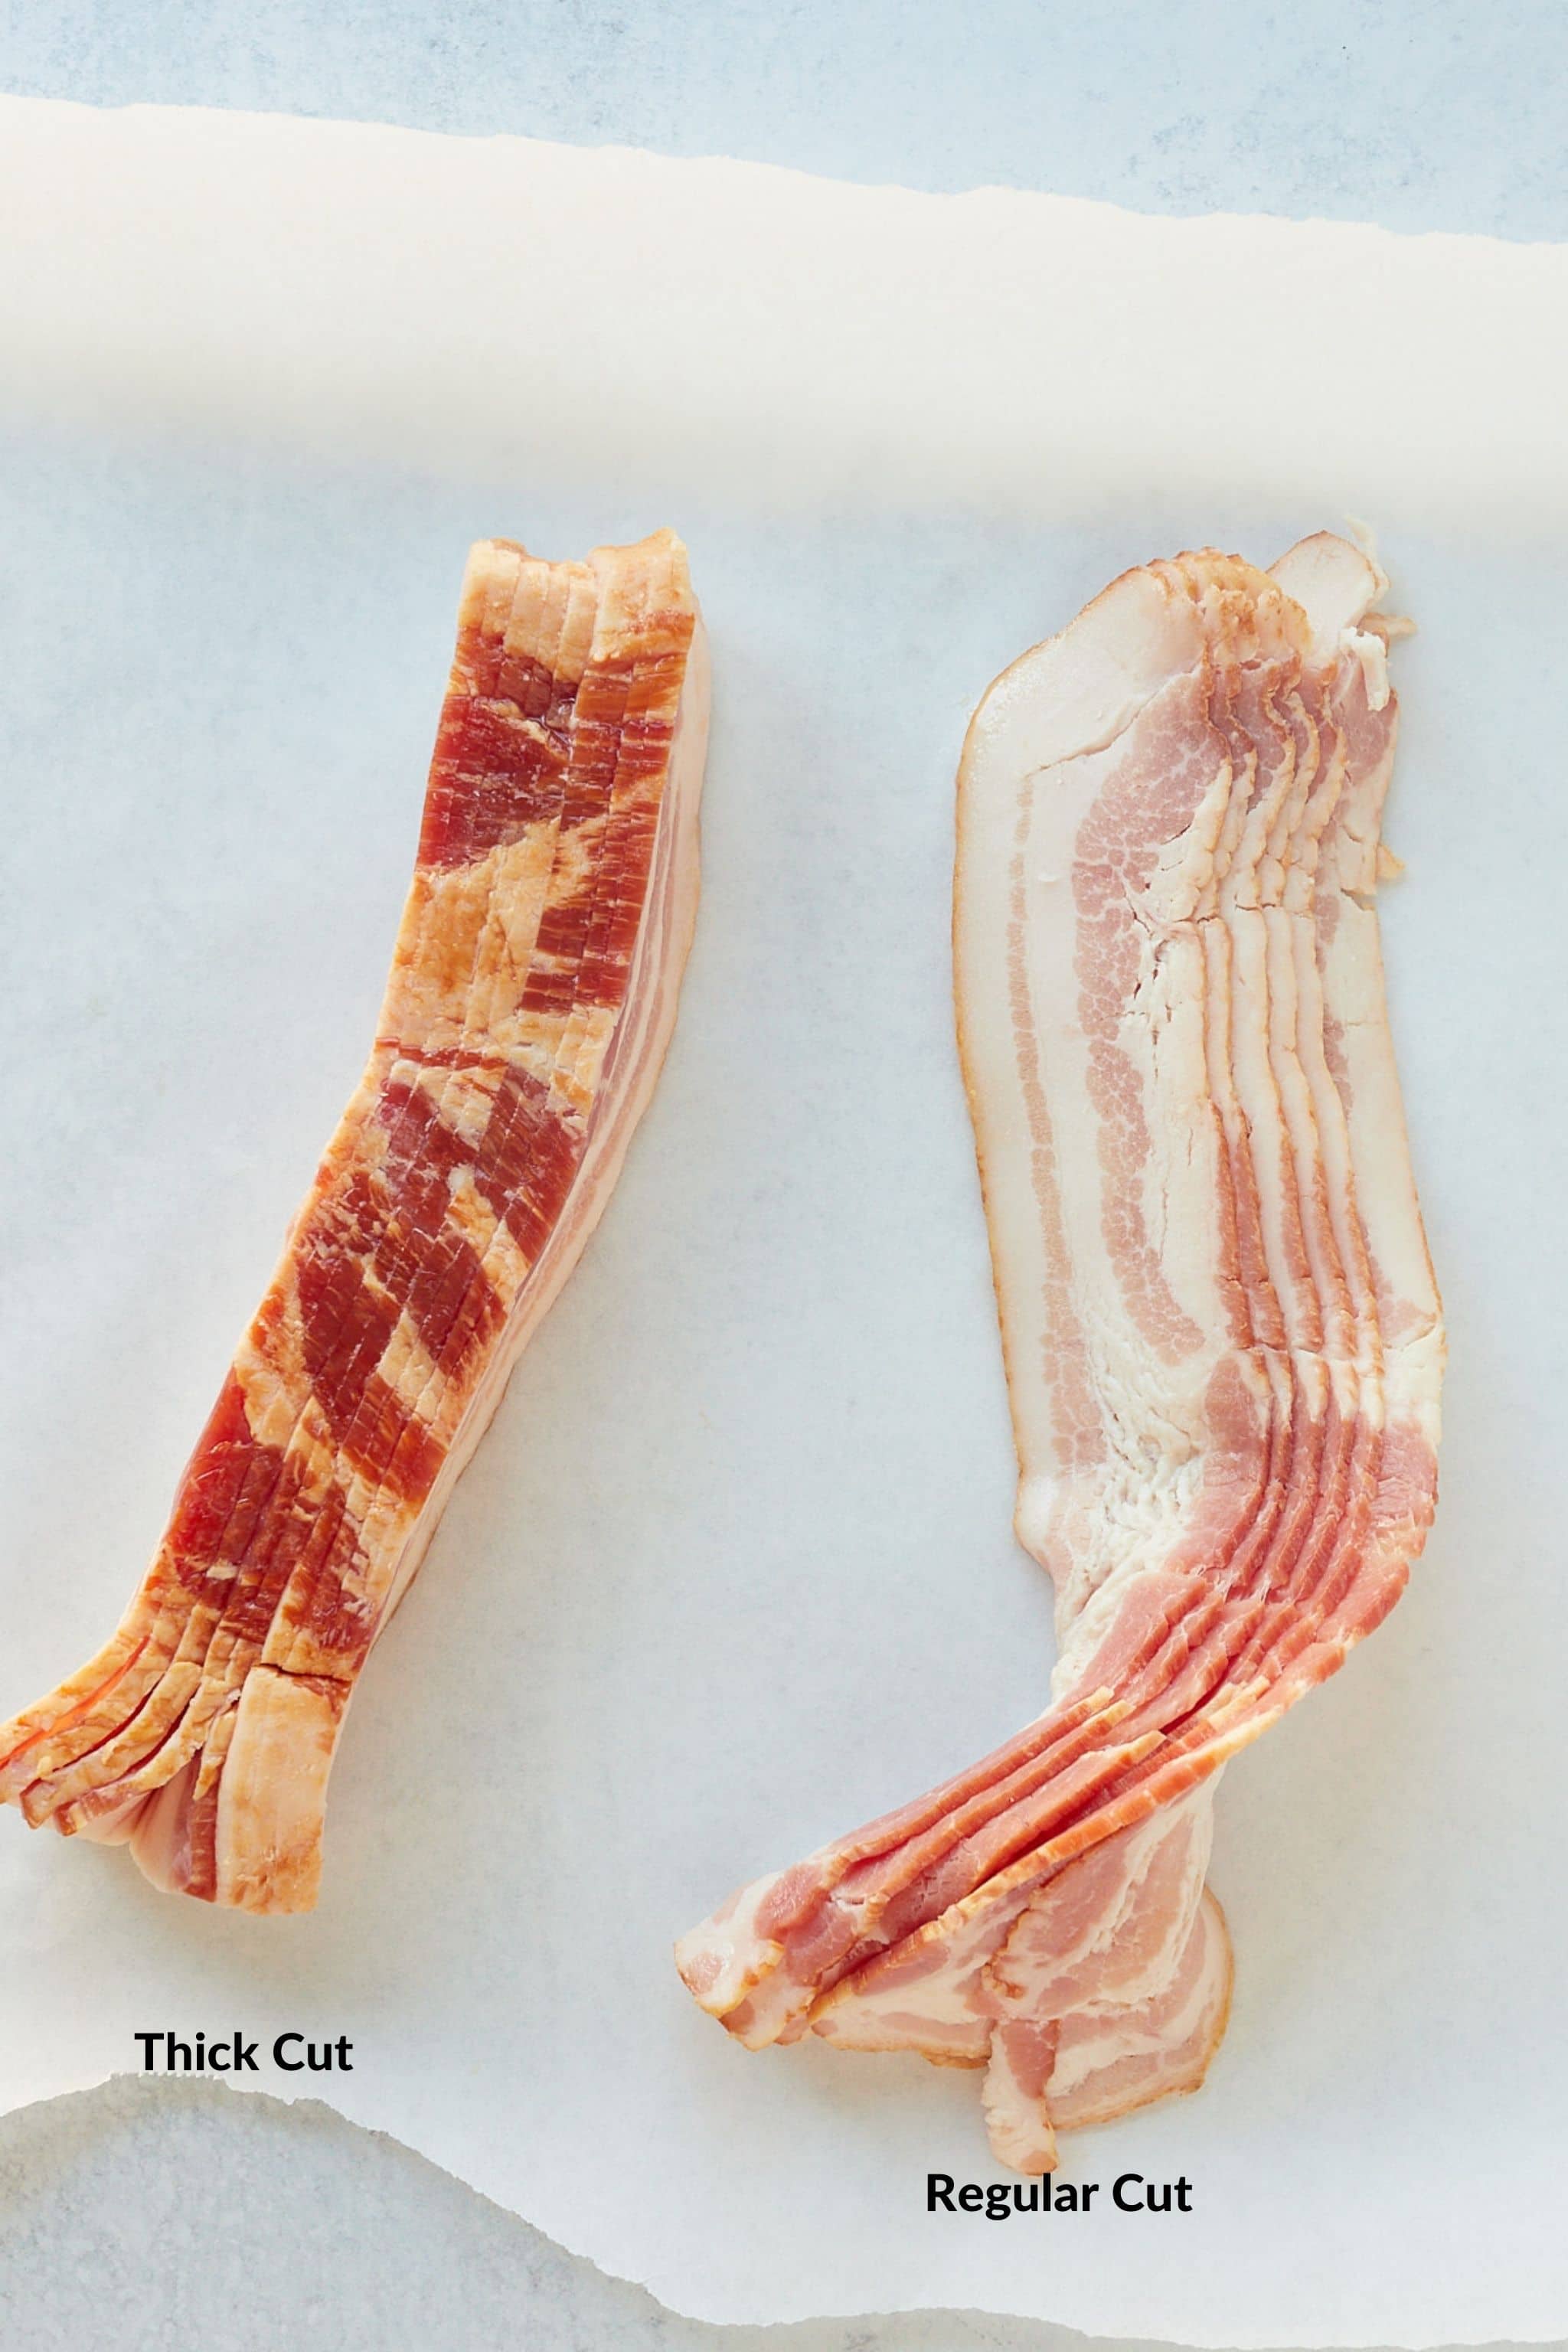 Thick cut and regular cut bacon.